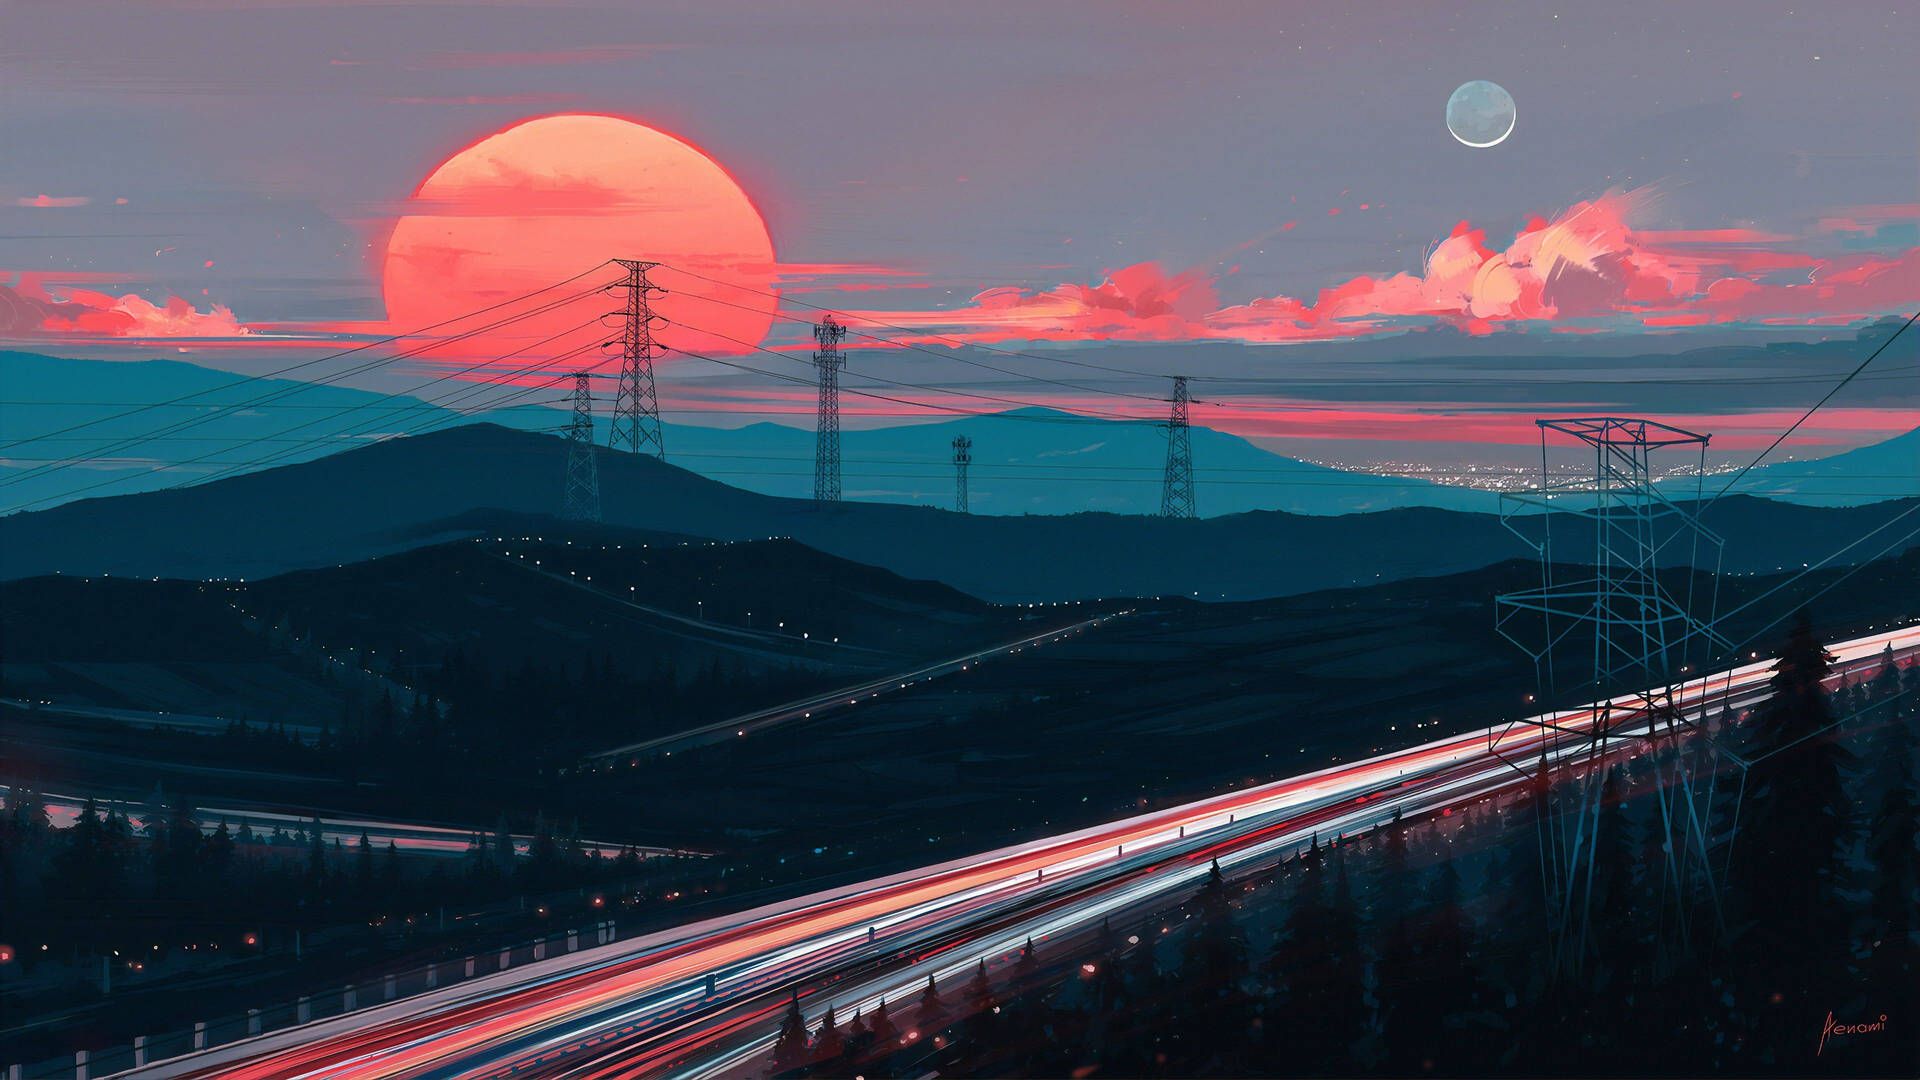 A painting of the sunset over mountains and highways - 1920x1080